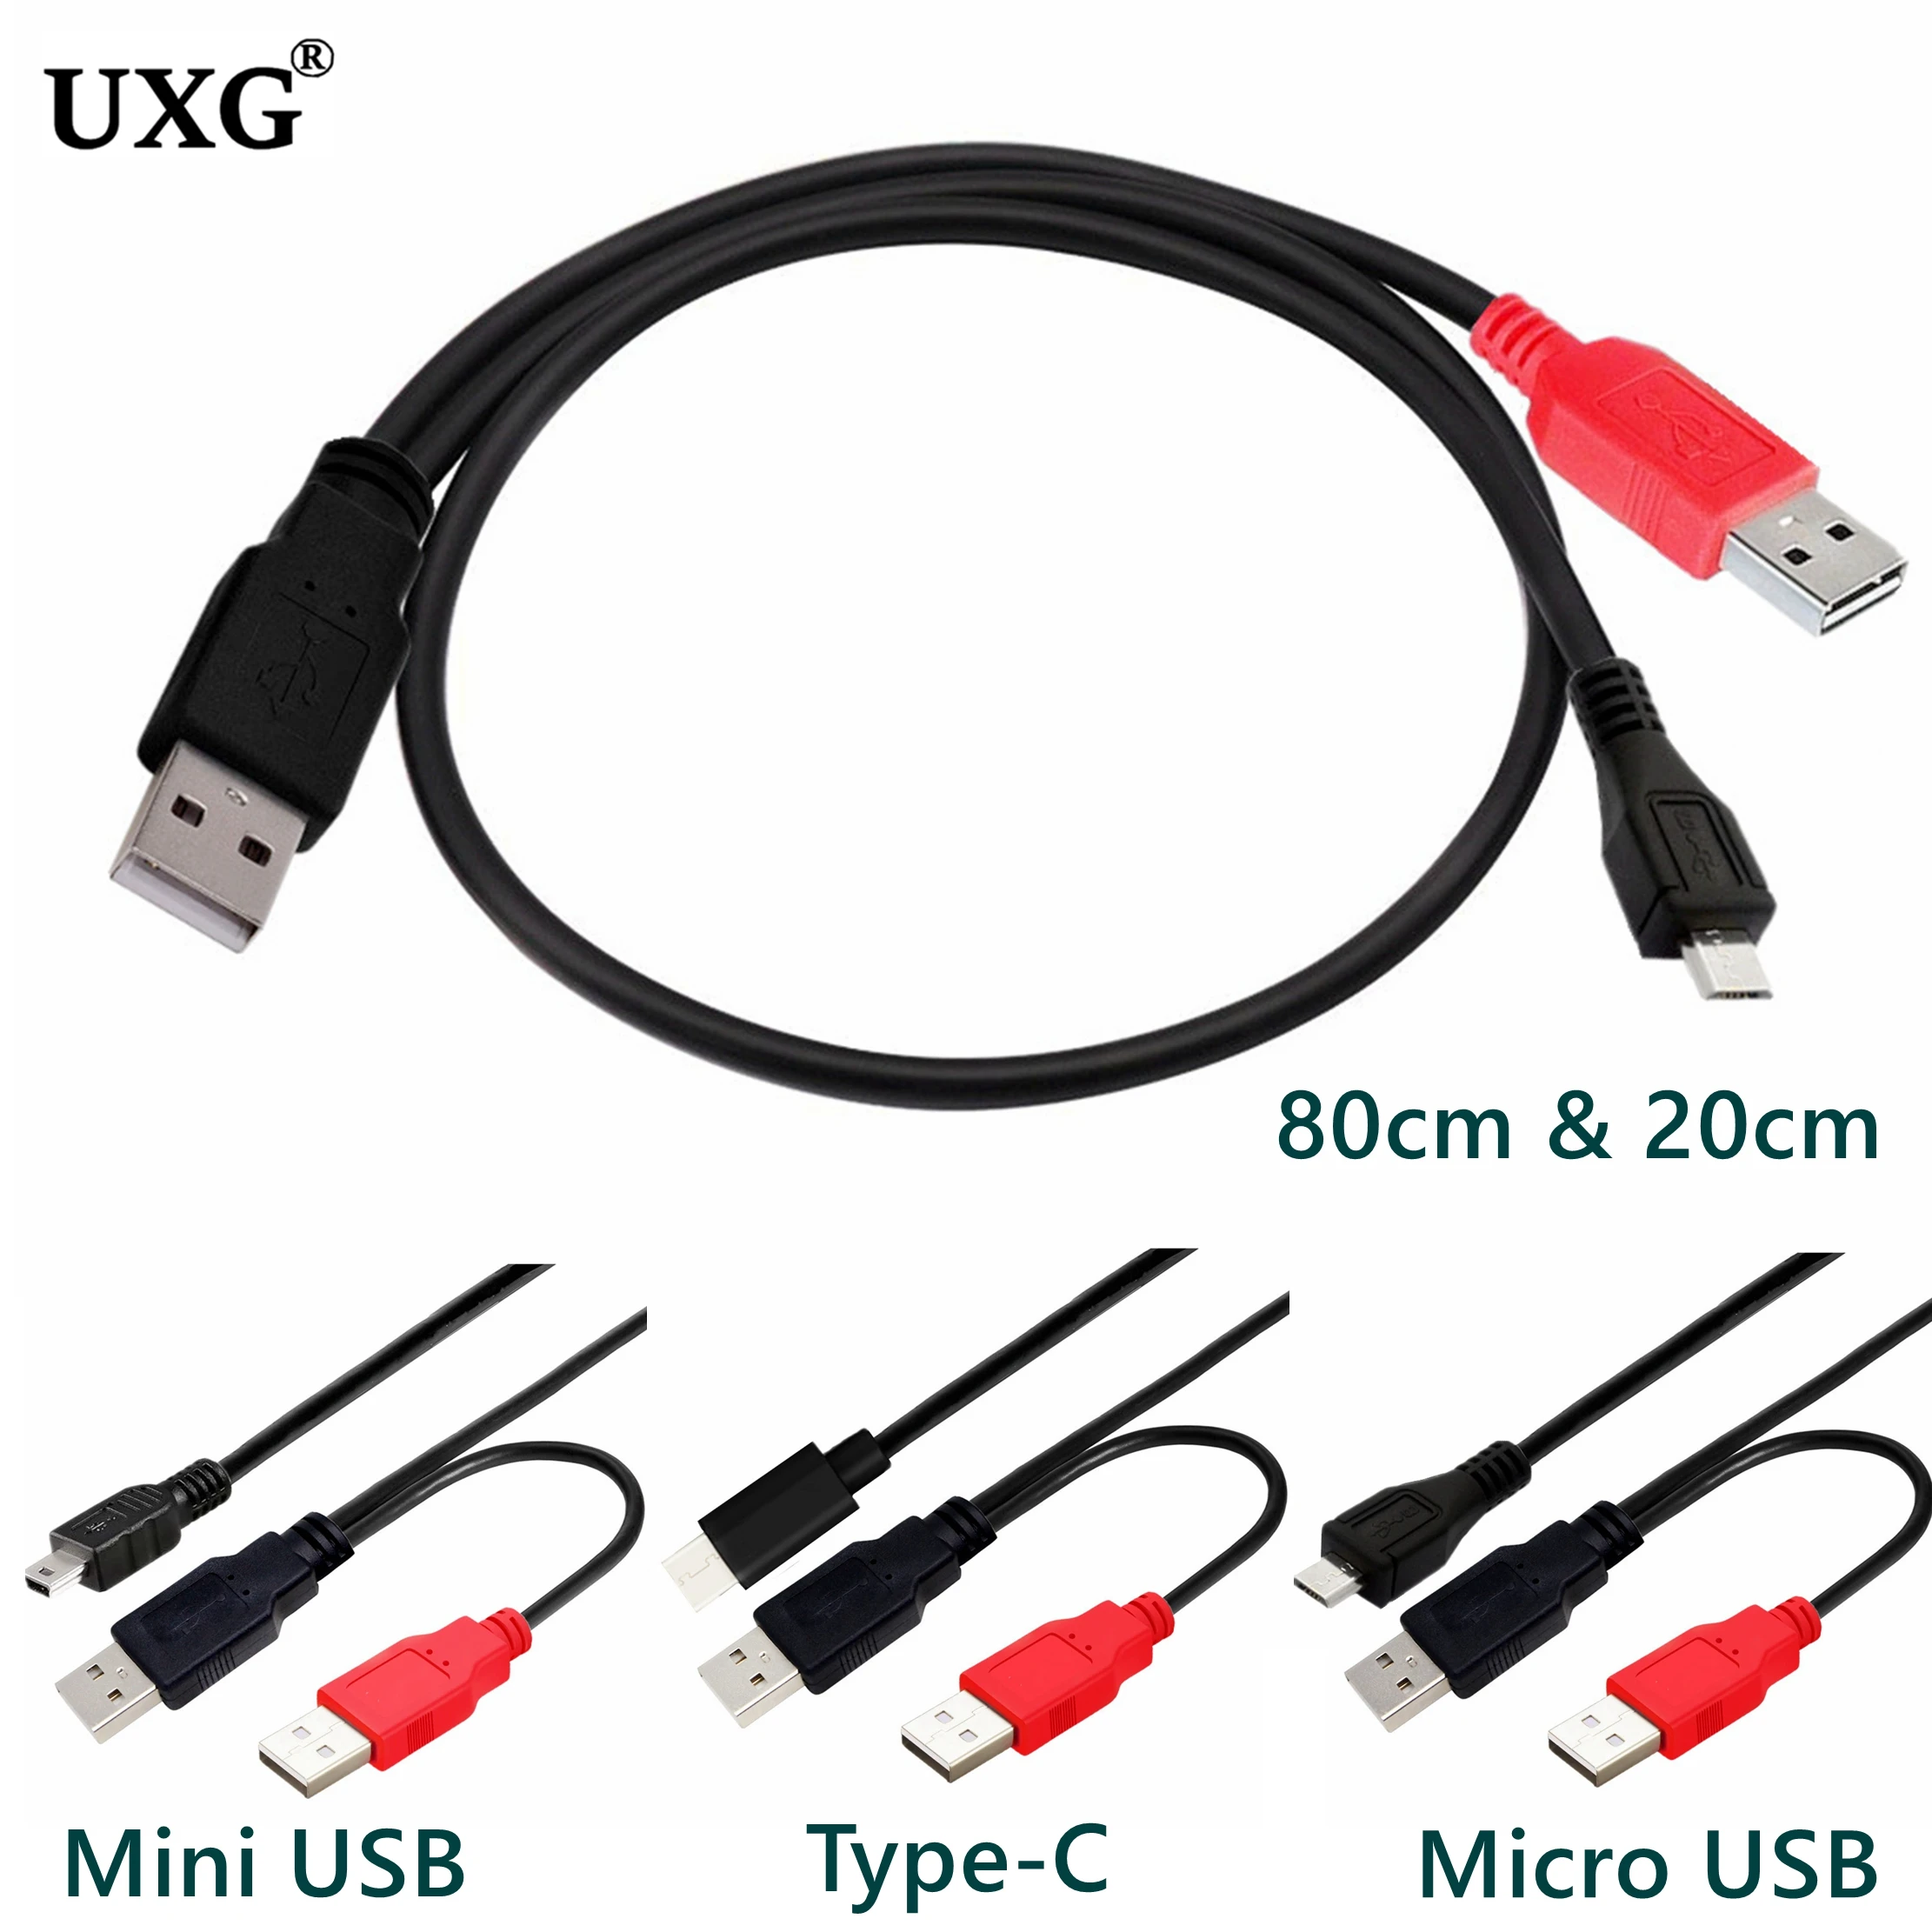 2 In 1 USB Double A Type C Male To Mini Micro USB-C USB 5 Pin Male Y Cable For 2.5" Hard Disk Drive HDD Date Printer Scanner